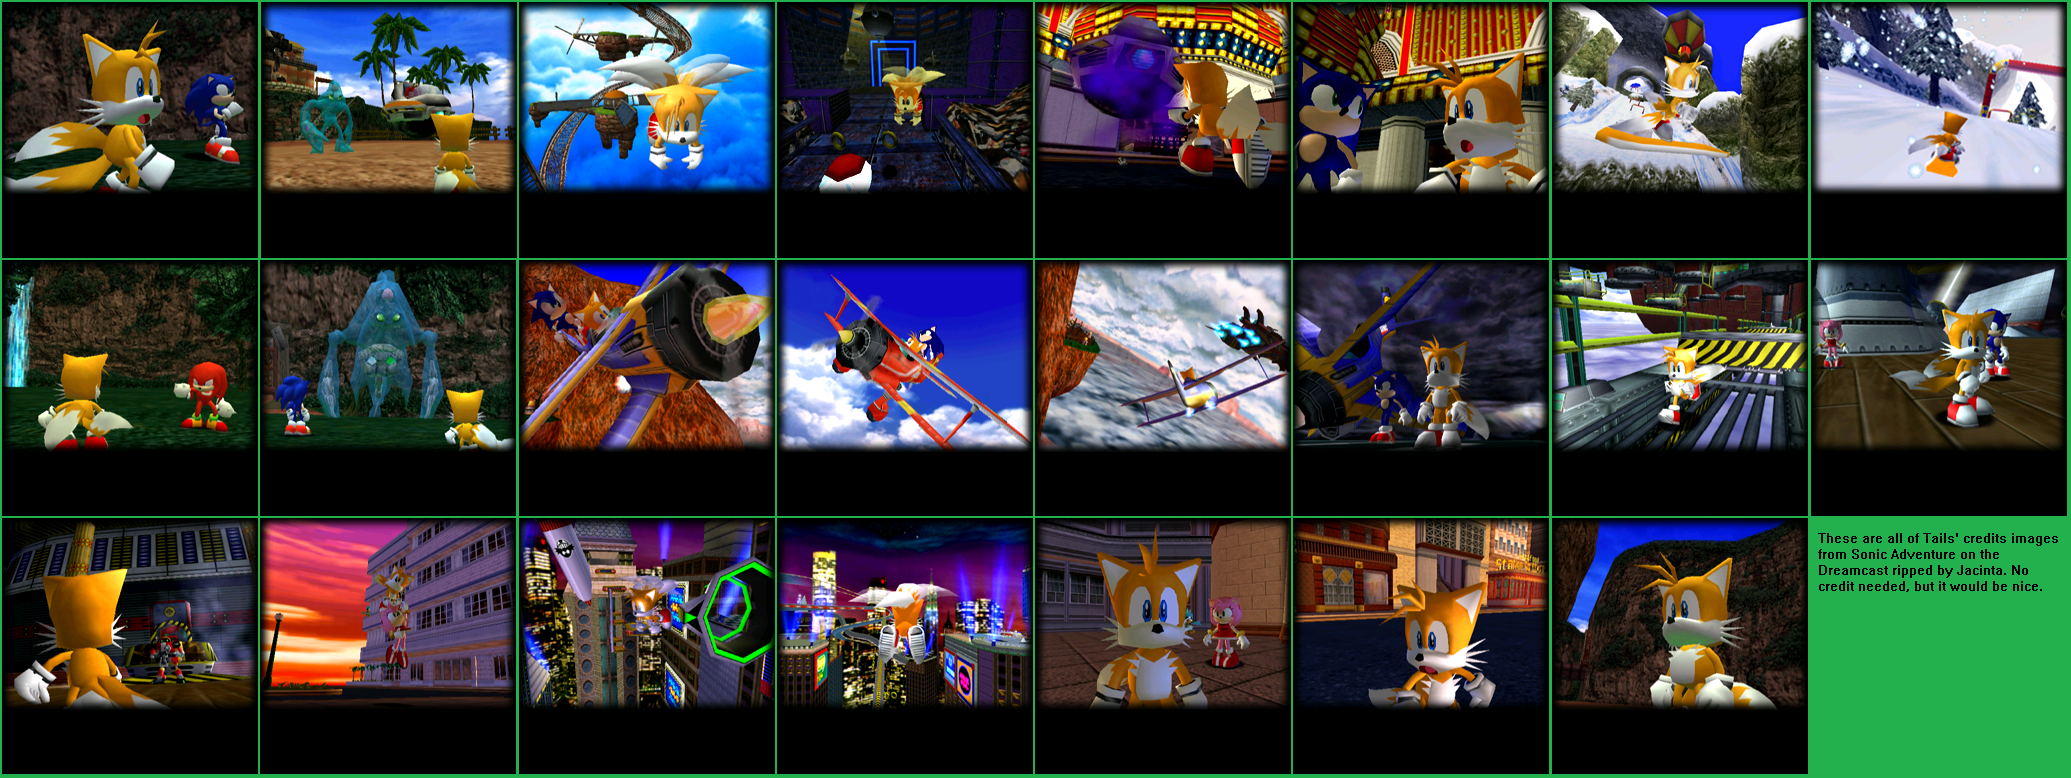 Sonic Adventure - Credits Images (Tails)